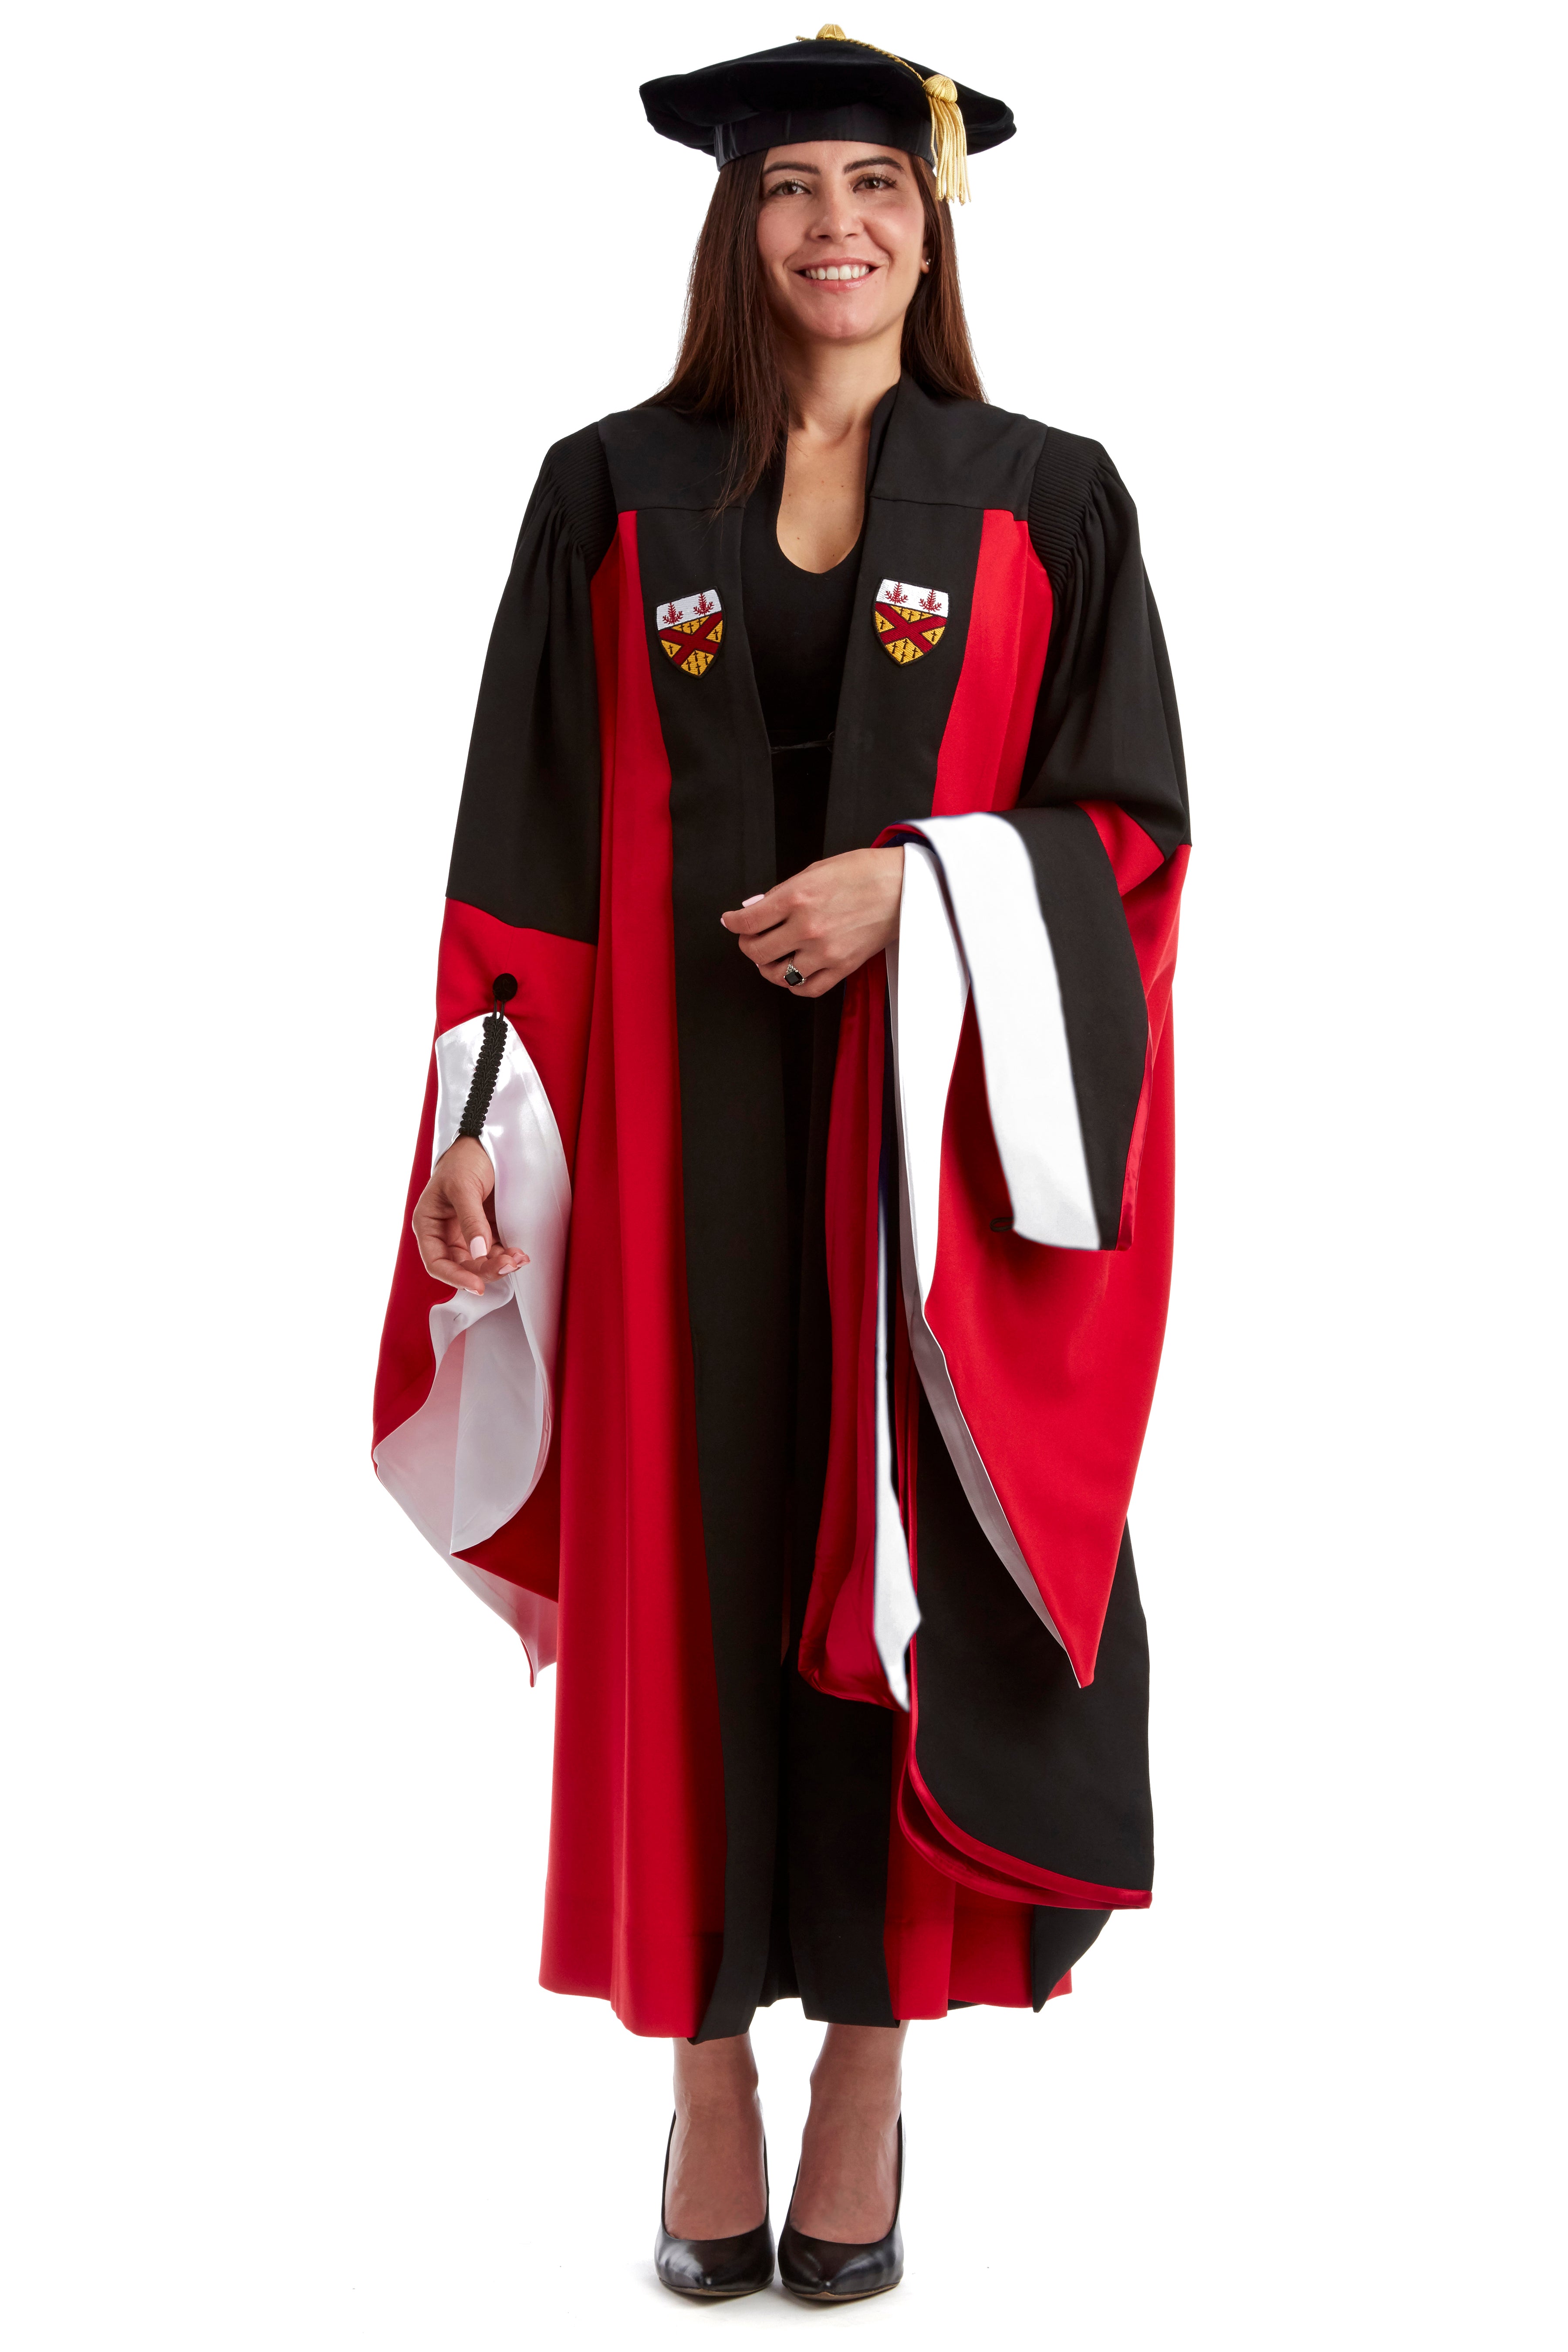 MeraConvocation Red Shiny Graduation Gown and Cap with Golden Border Graduation  Gown Price in India - Buy MeraConvocation Red Shiny Graduation Gown and Cap  with Golden Border Graduation Gown online at Flipkart.com